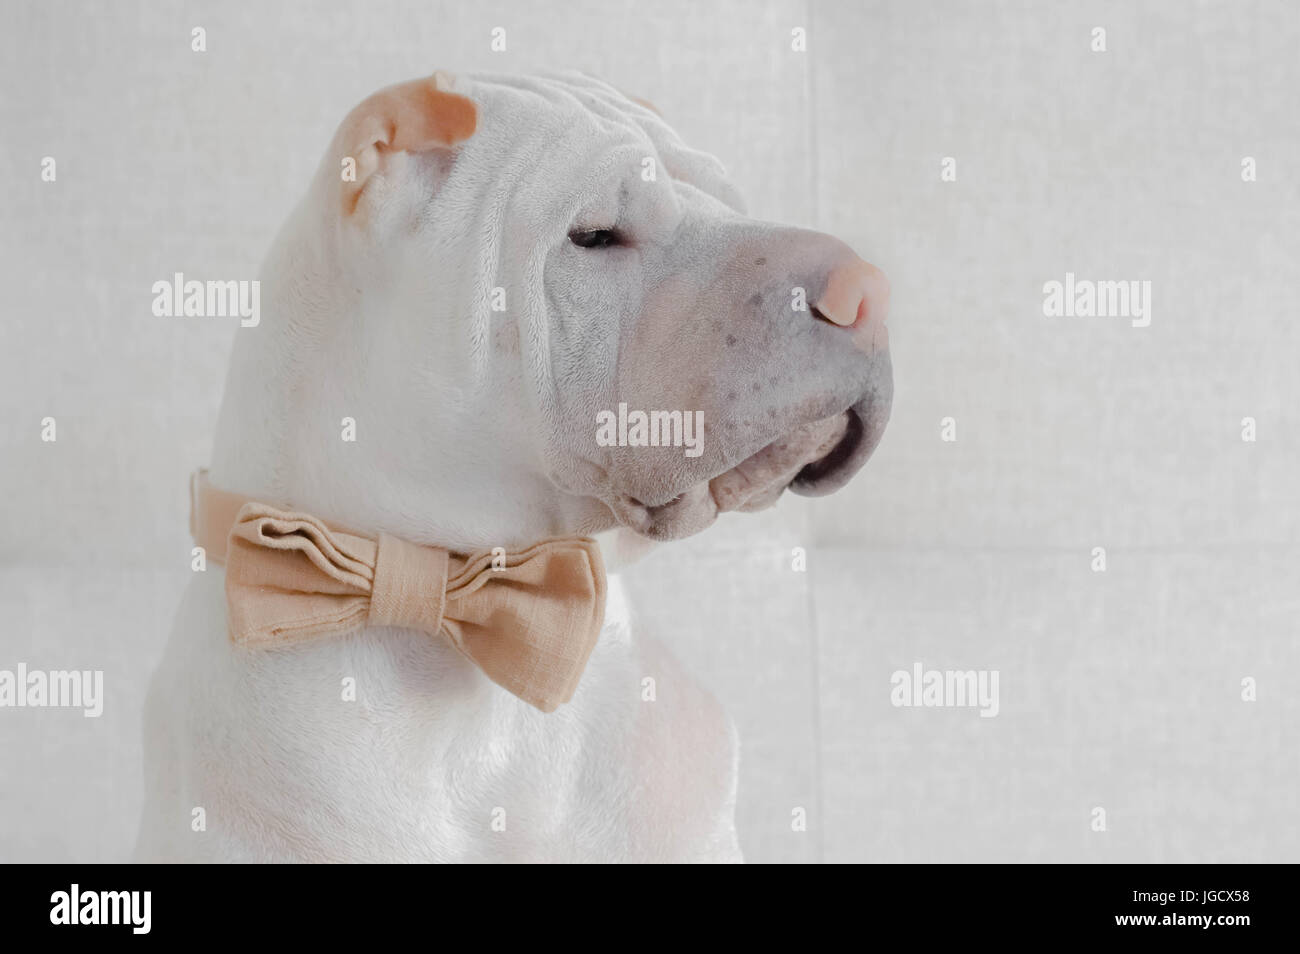 Shar pei dog wearing a bow tie Stock Photo